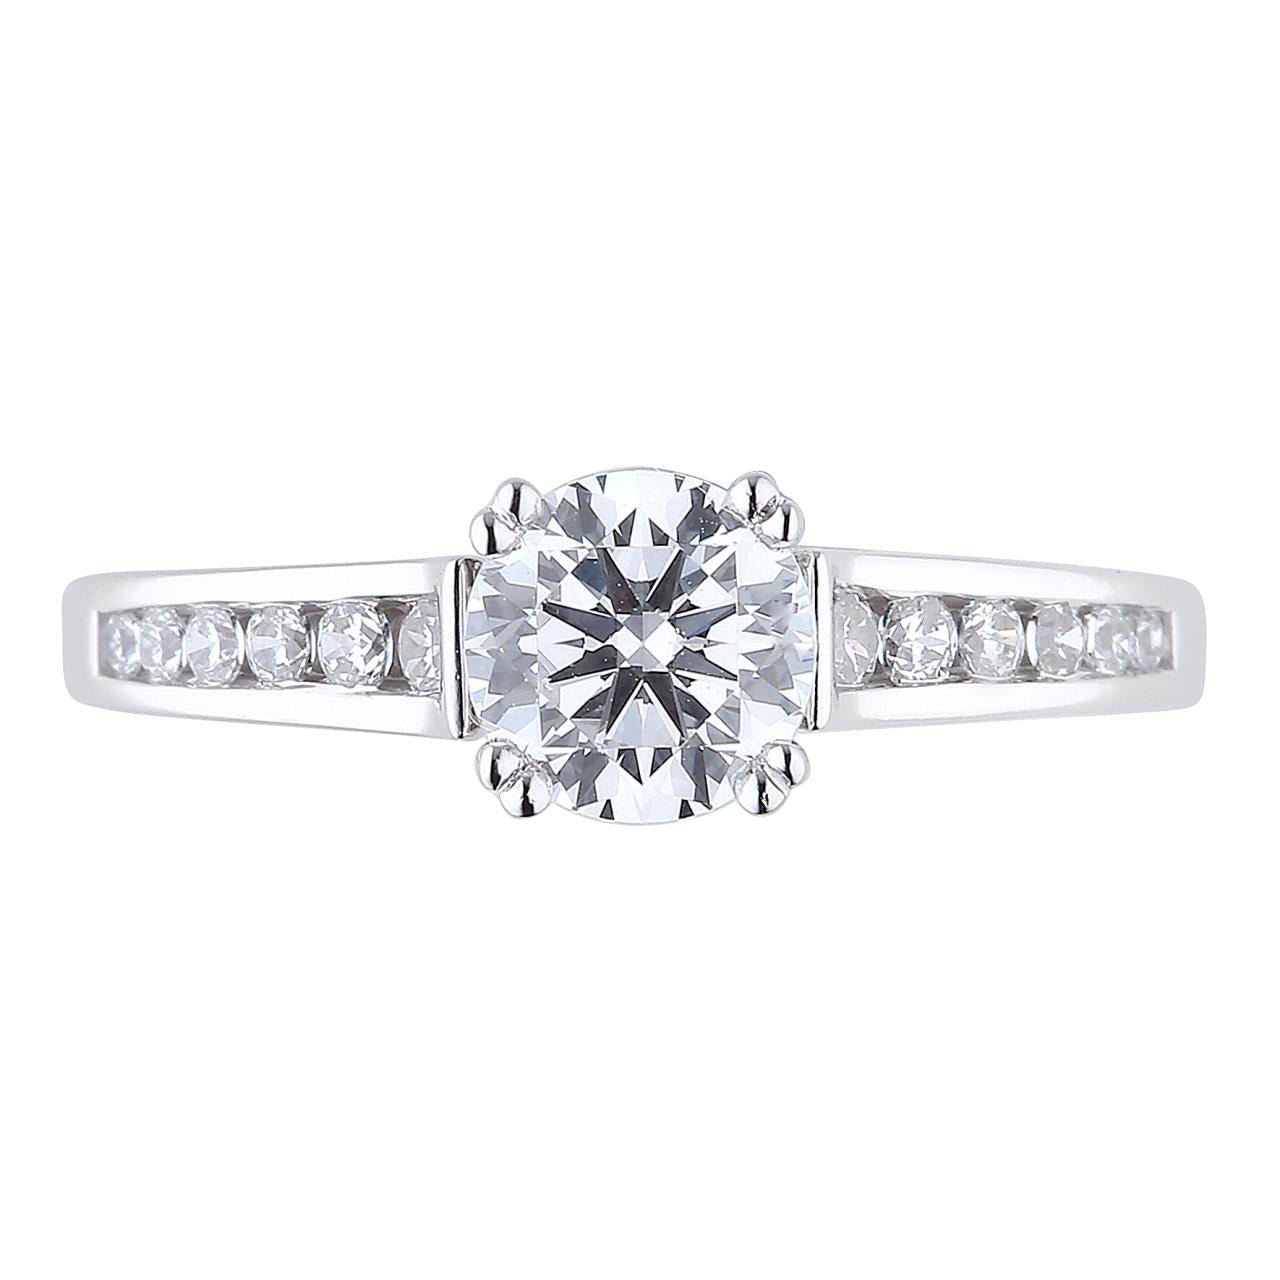 18k White Gold Channel Set Engagement Ring - Warwick Jewelers